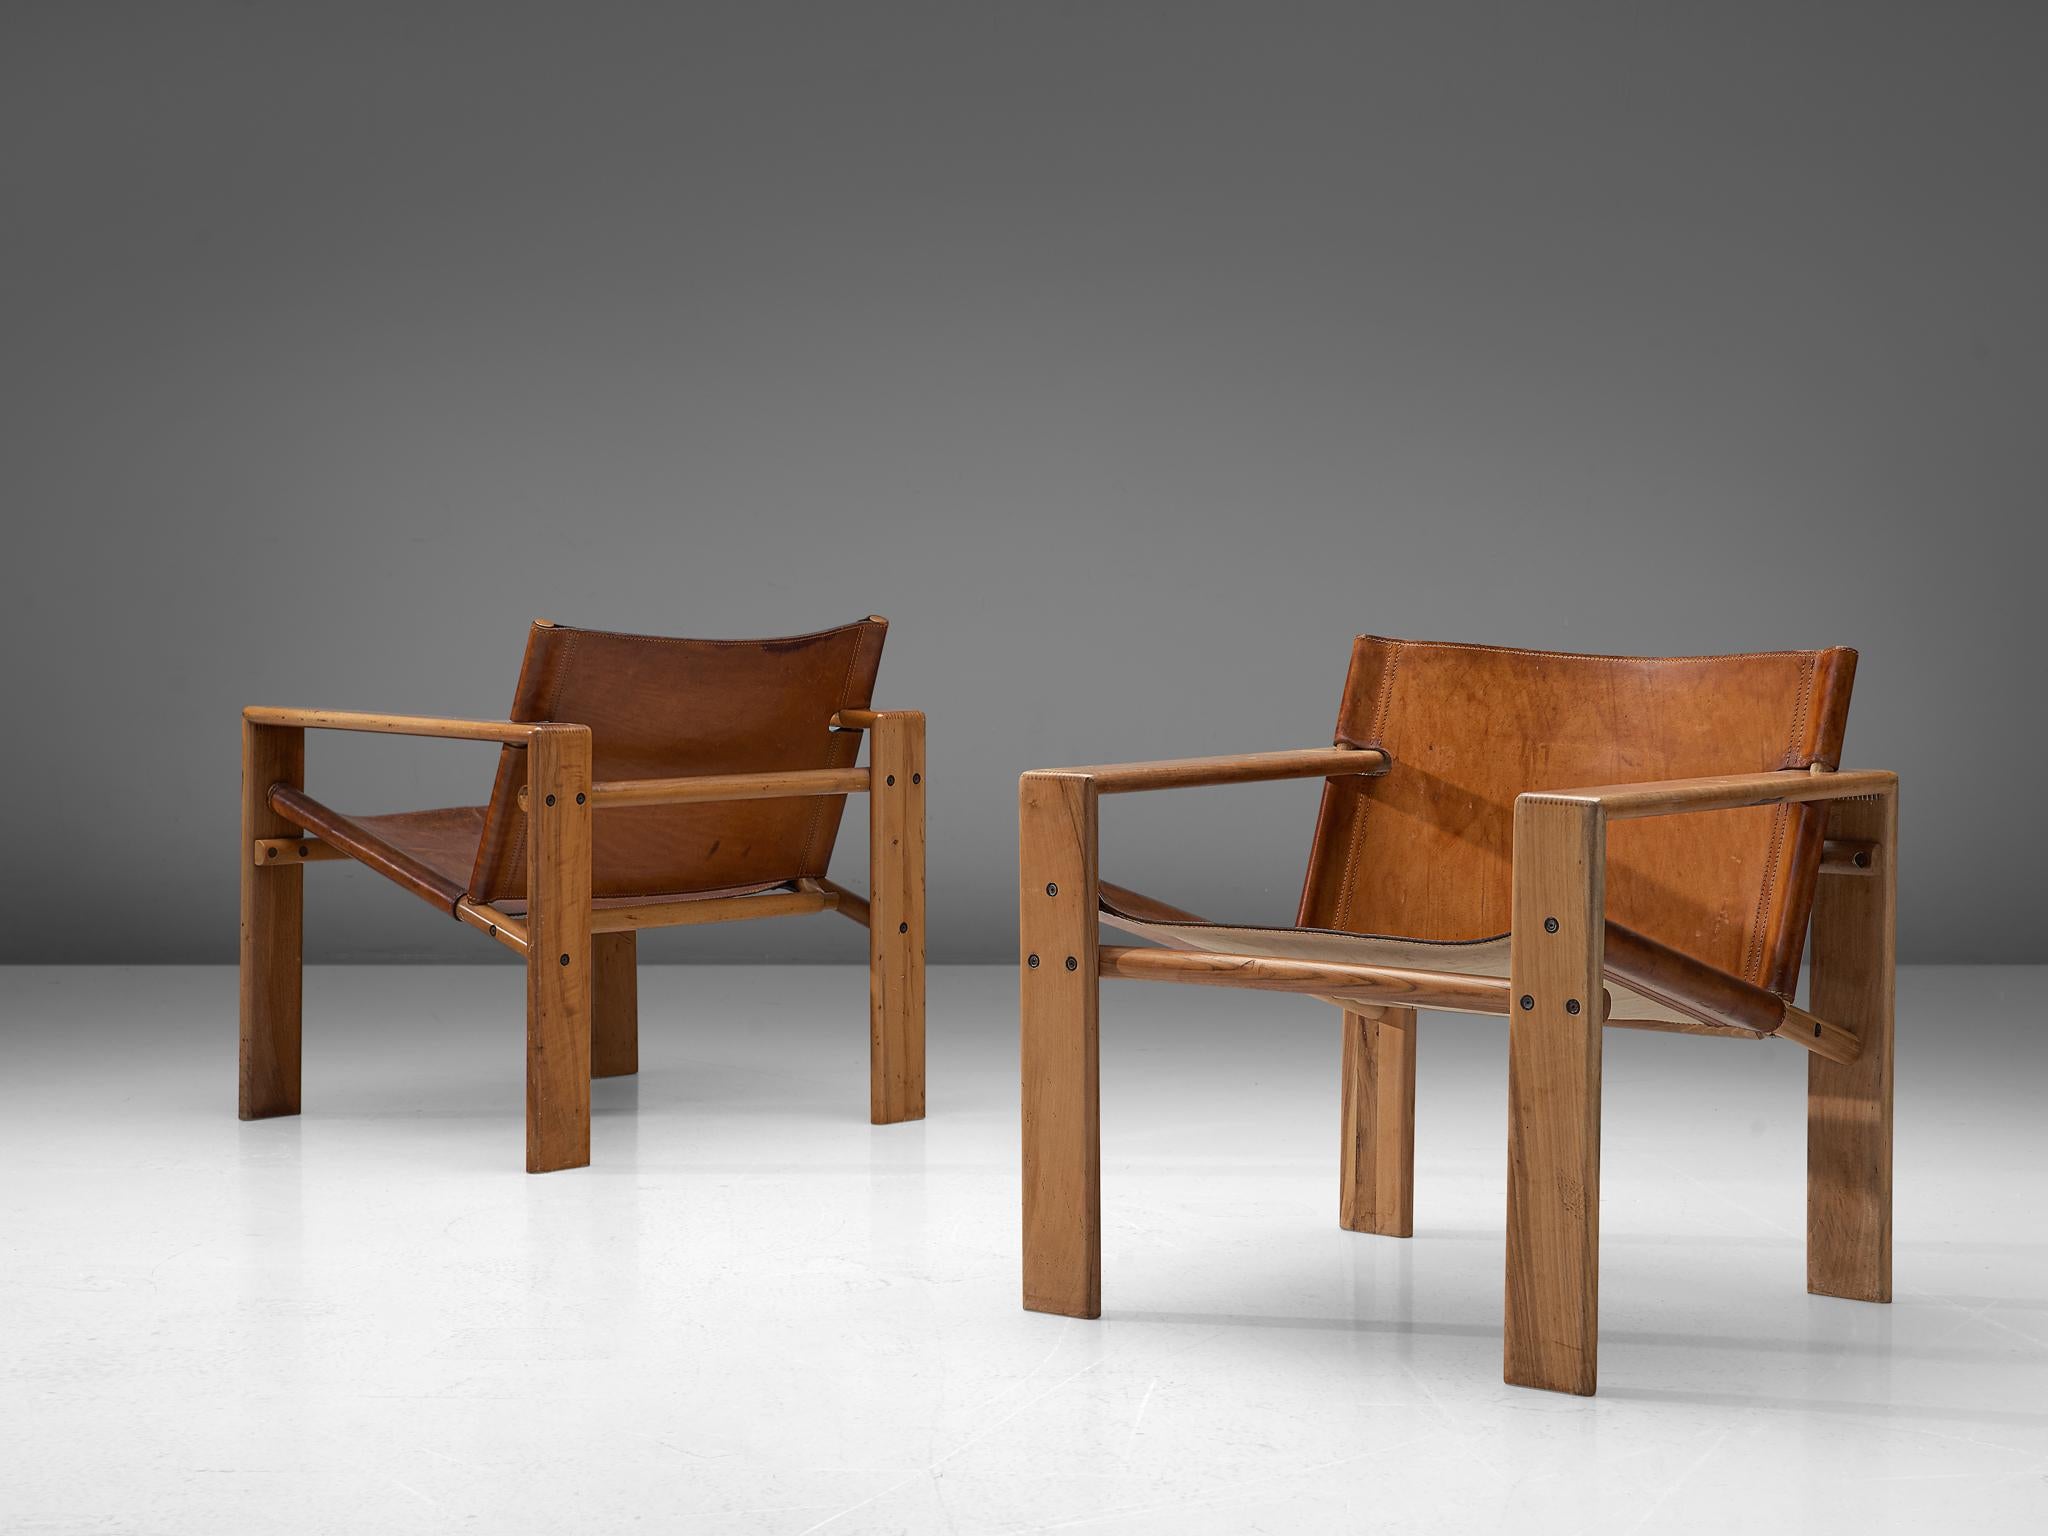 Tarcisio Colzani, set of two armchairs, in cognac leather, elm, Italy, circa 1965.

These comfortable armchairs in elm and cognac saddle leather feature a wonderful and rich patina and is therefore especially interesting as the aging of the leather